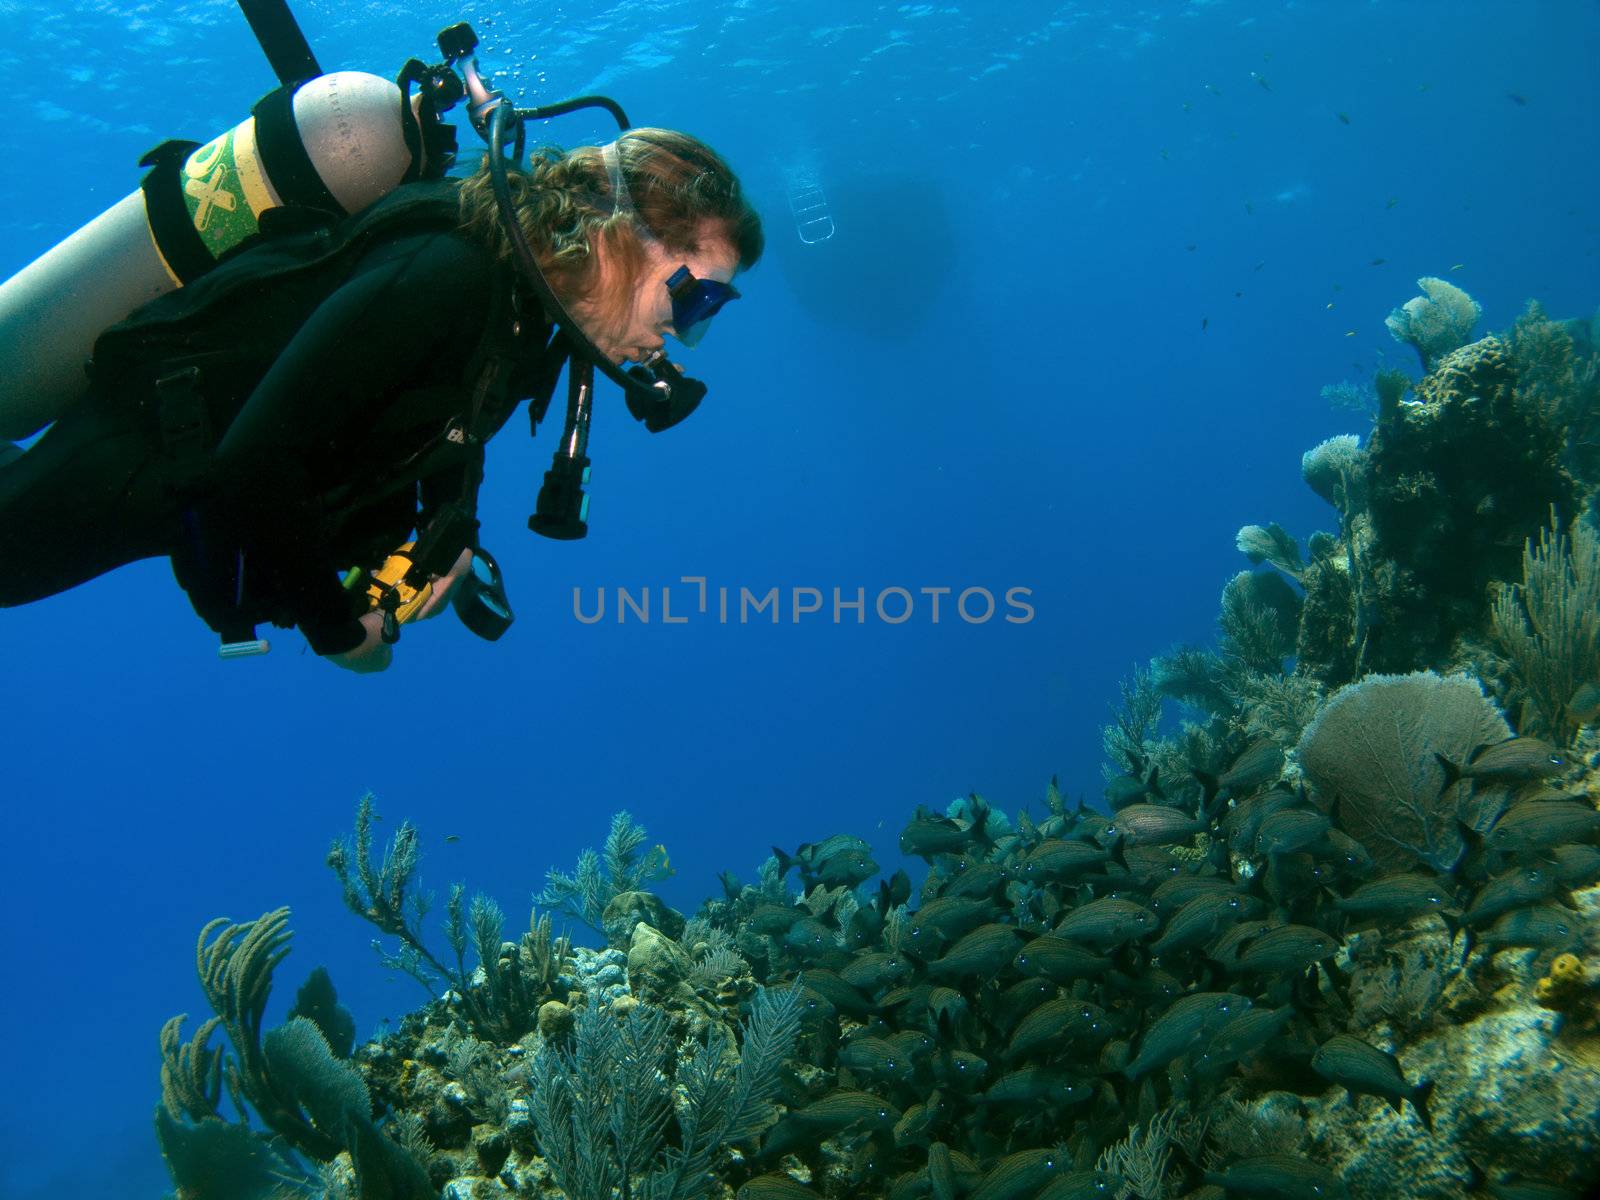 Woman Scuba Diver Looking at A school of Fish on a Cayman Island Reef with Boat in background